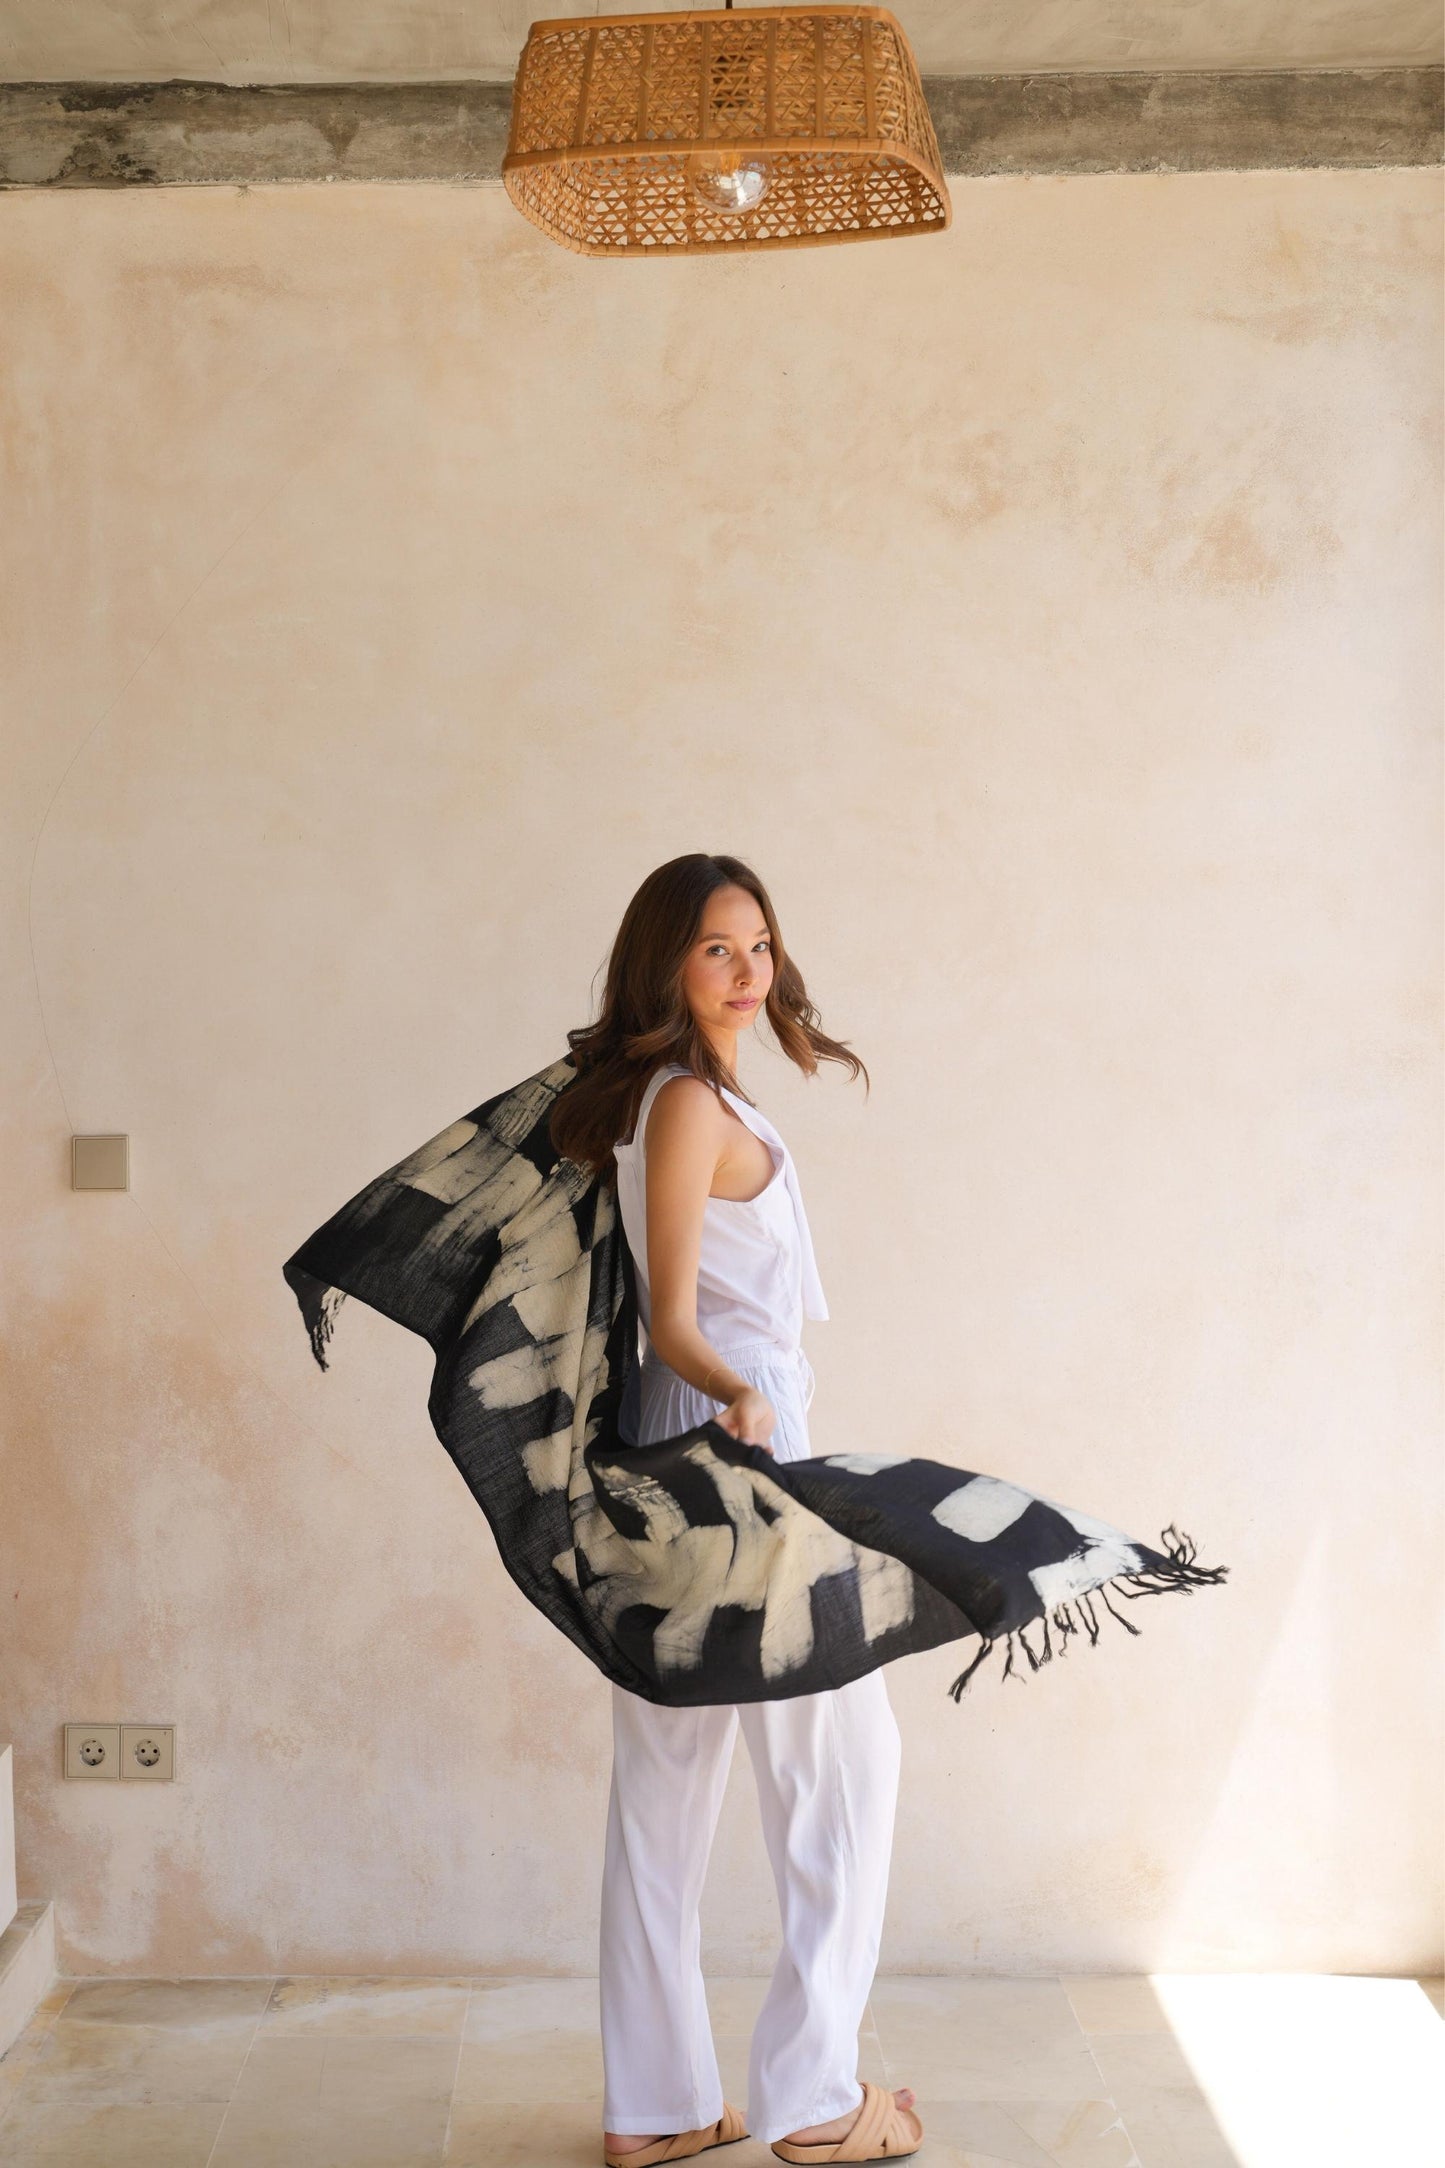 Load image into Gallery viewer, Rhea Hand Dyed Organic Cotton Scarf in Black and White
